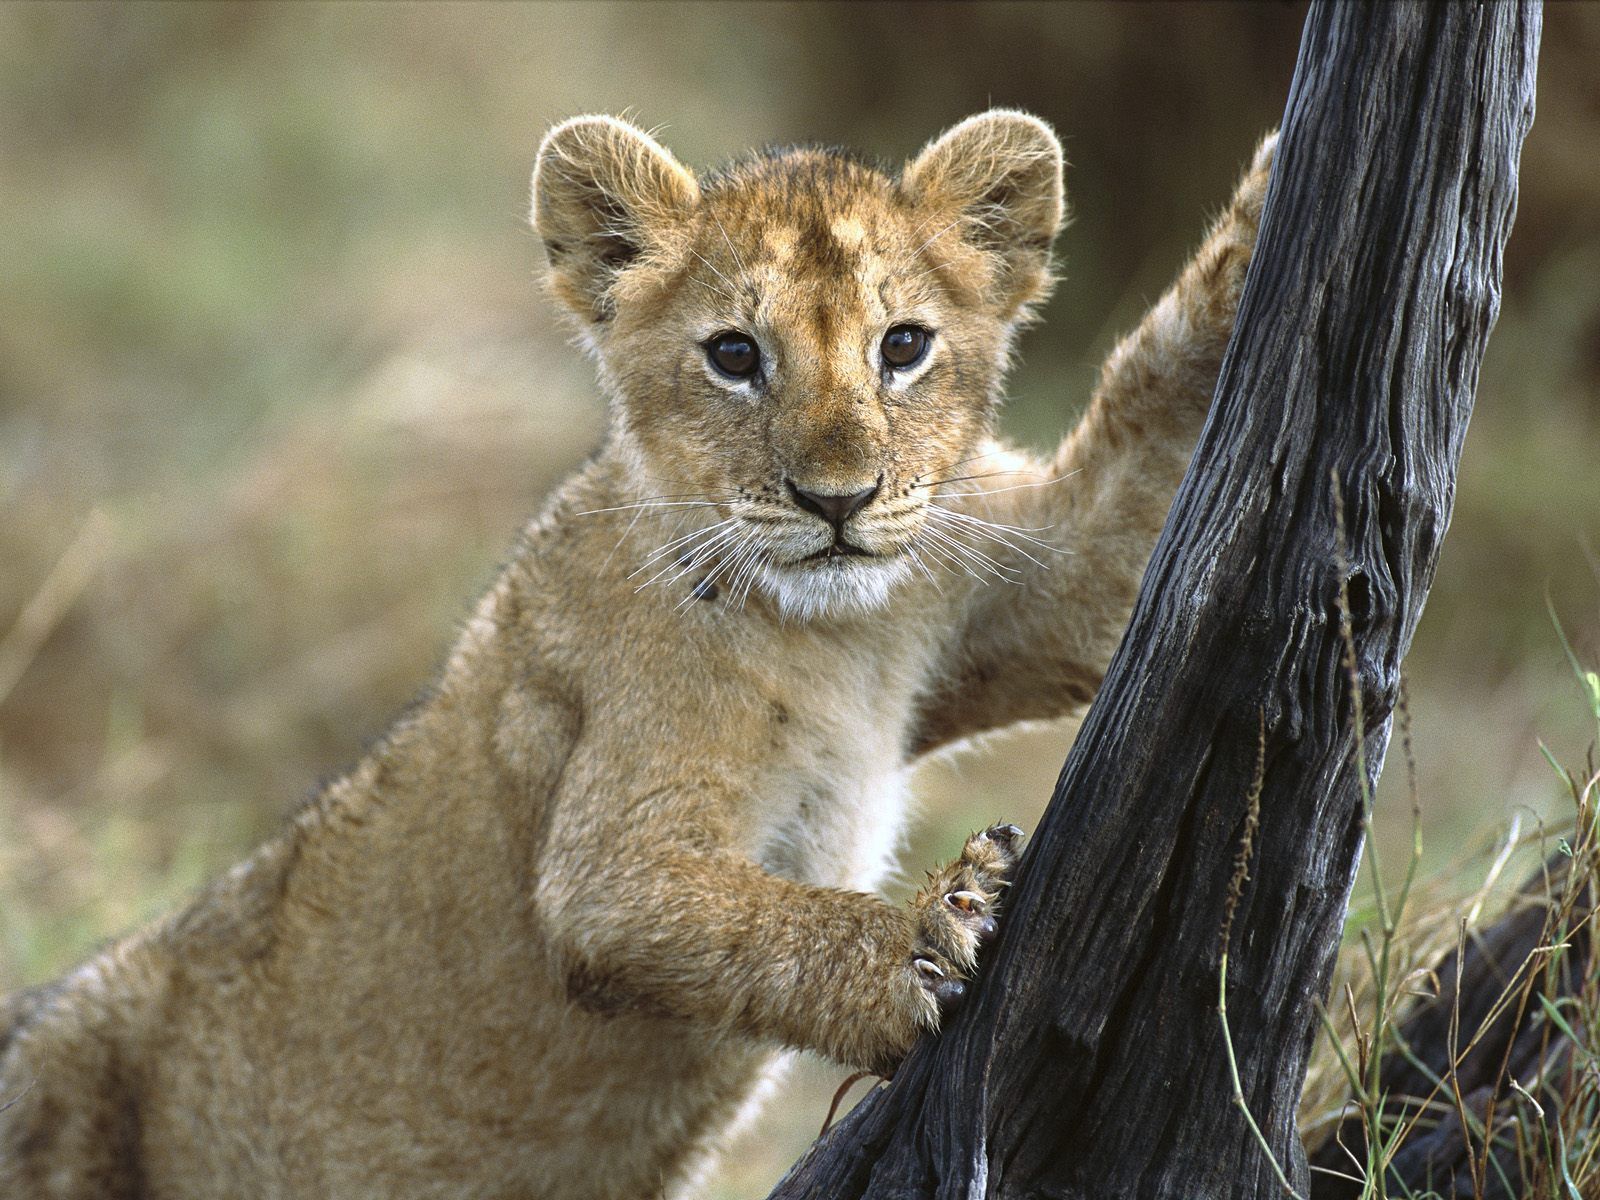 tot, lion cub, animals, young, lion, stroll, kid, joey